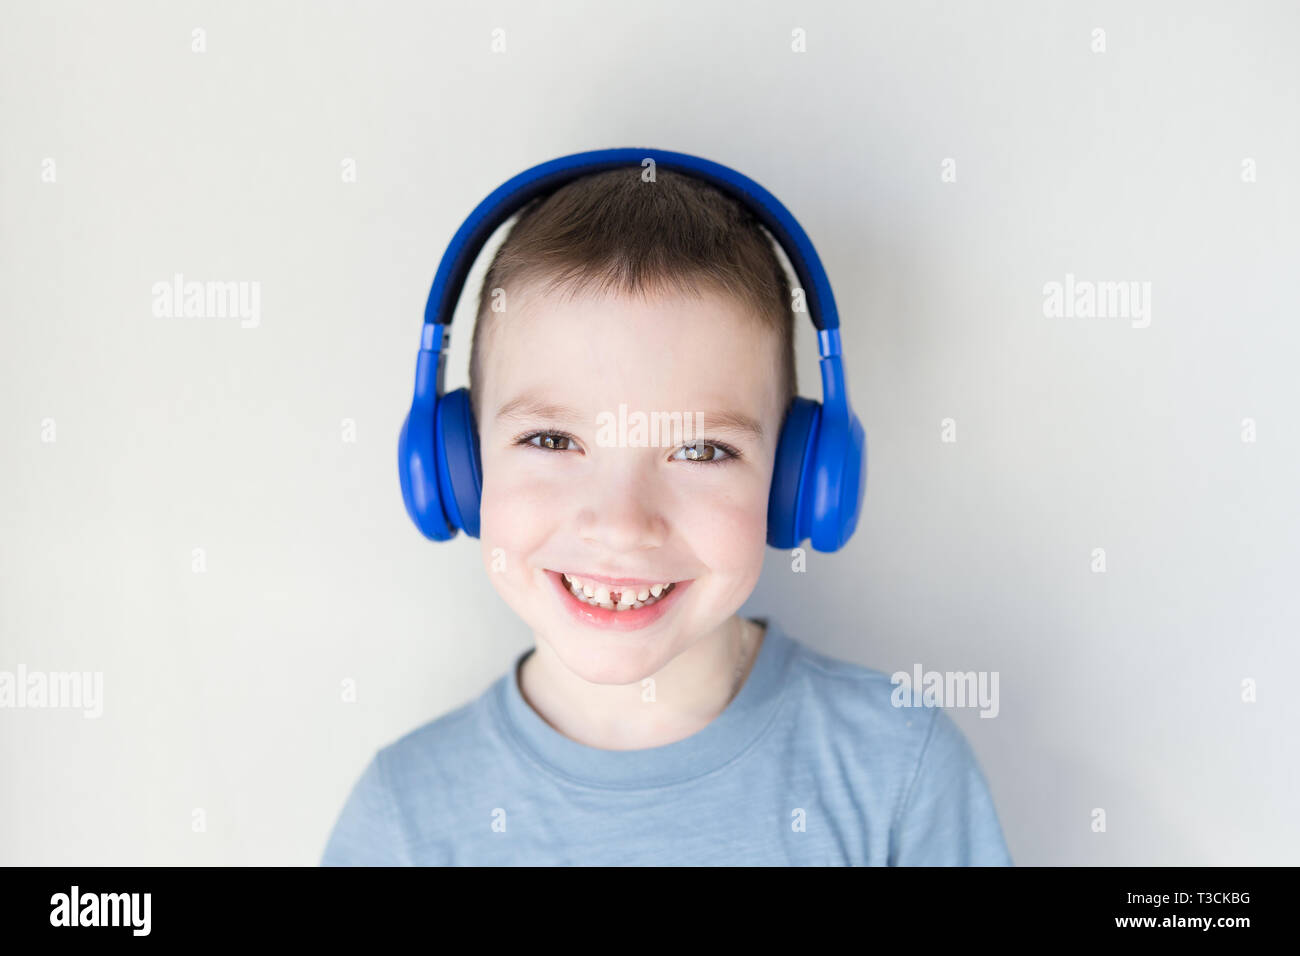 The young boy is smiling and listening to music in blue headphones, standing in front of white wall. Stock Photo